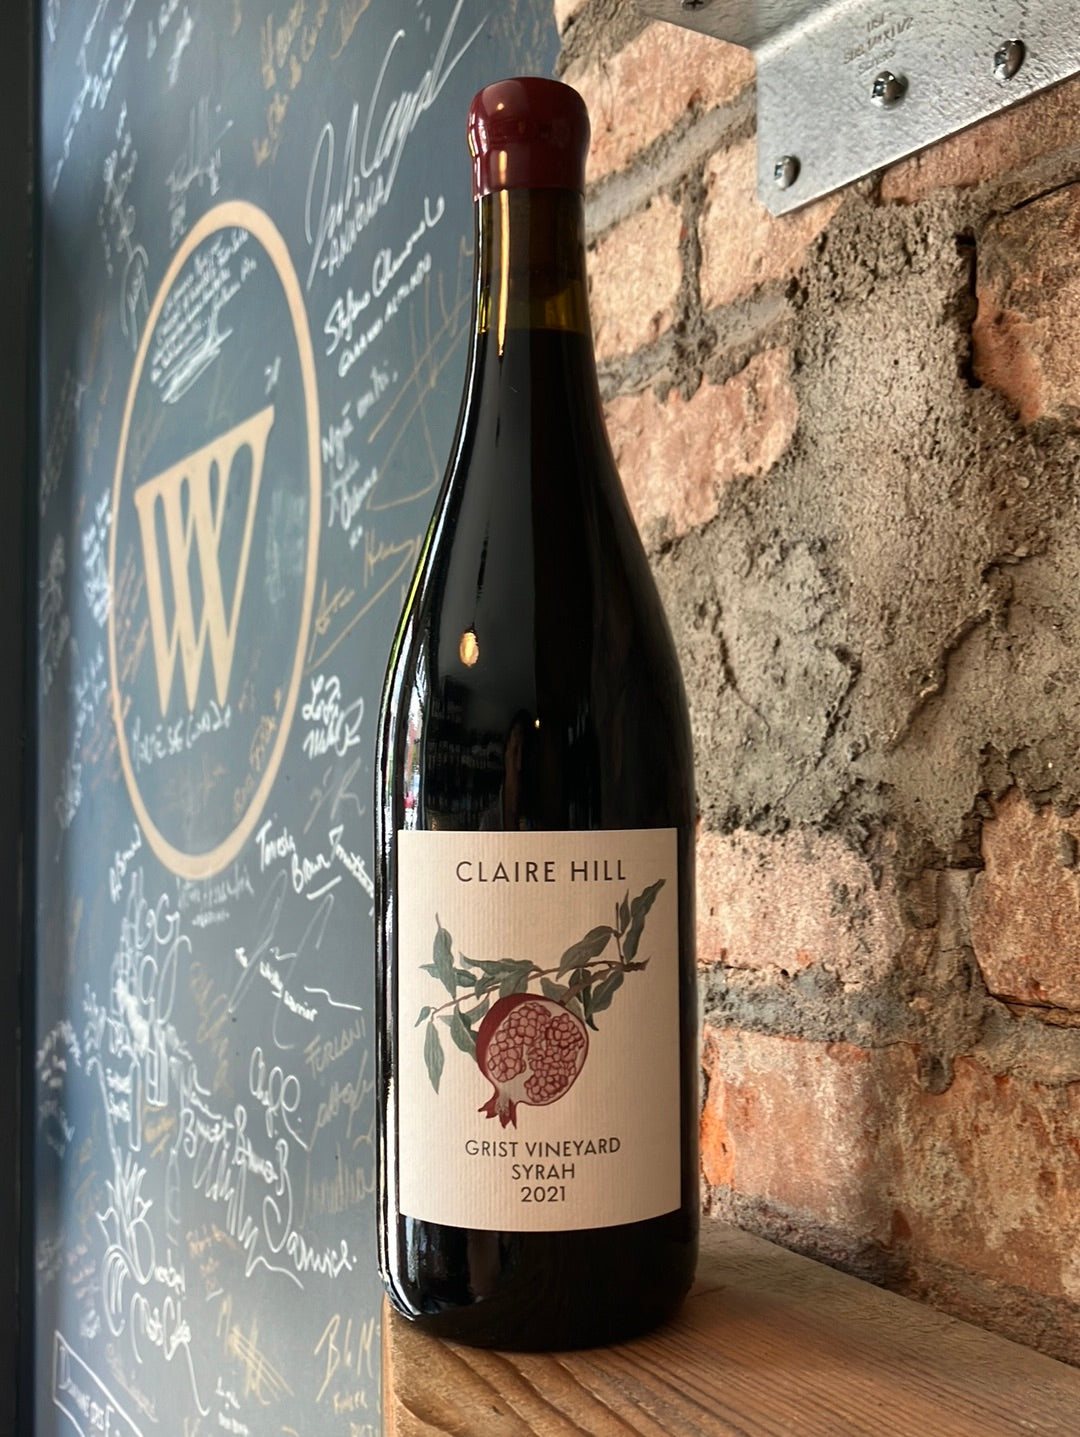 Claire Hill 'Grist Vineyard' Syrah Dry Creek Valley 2021